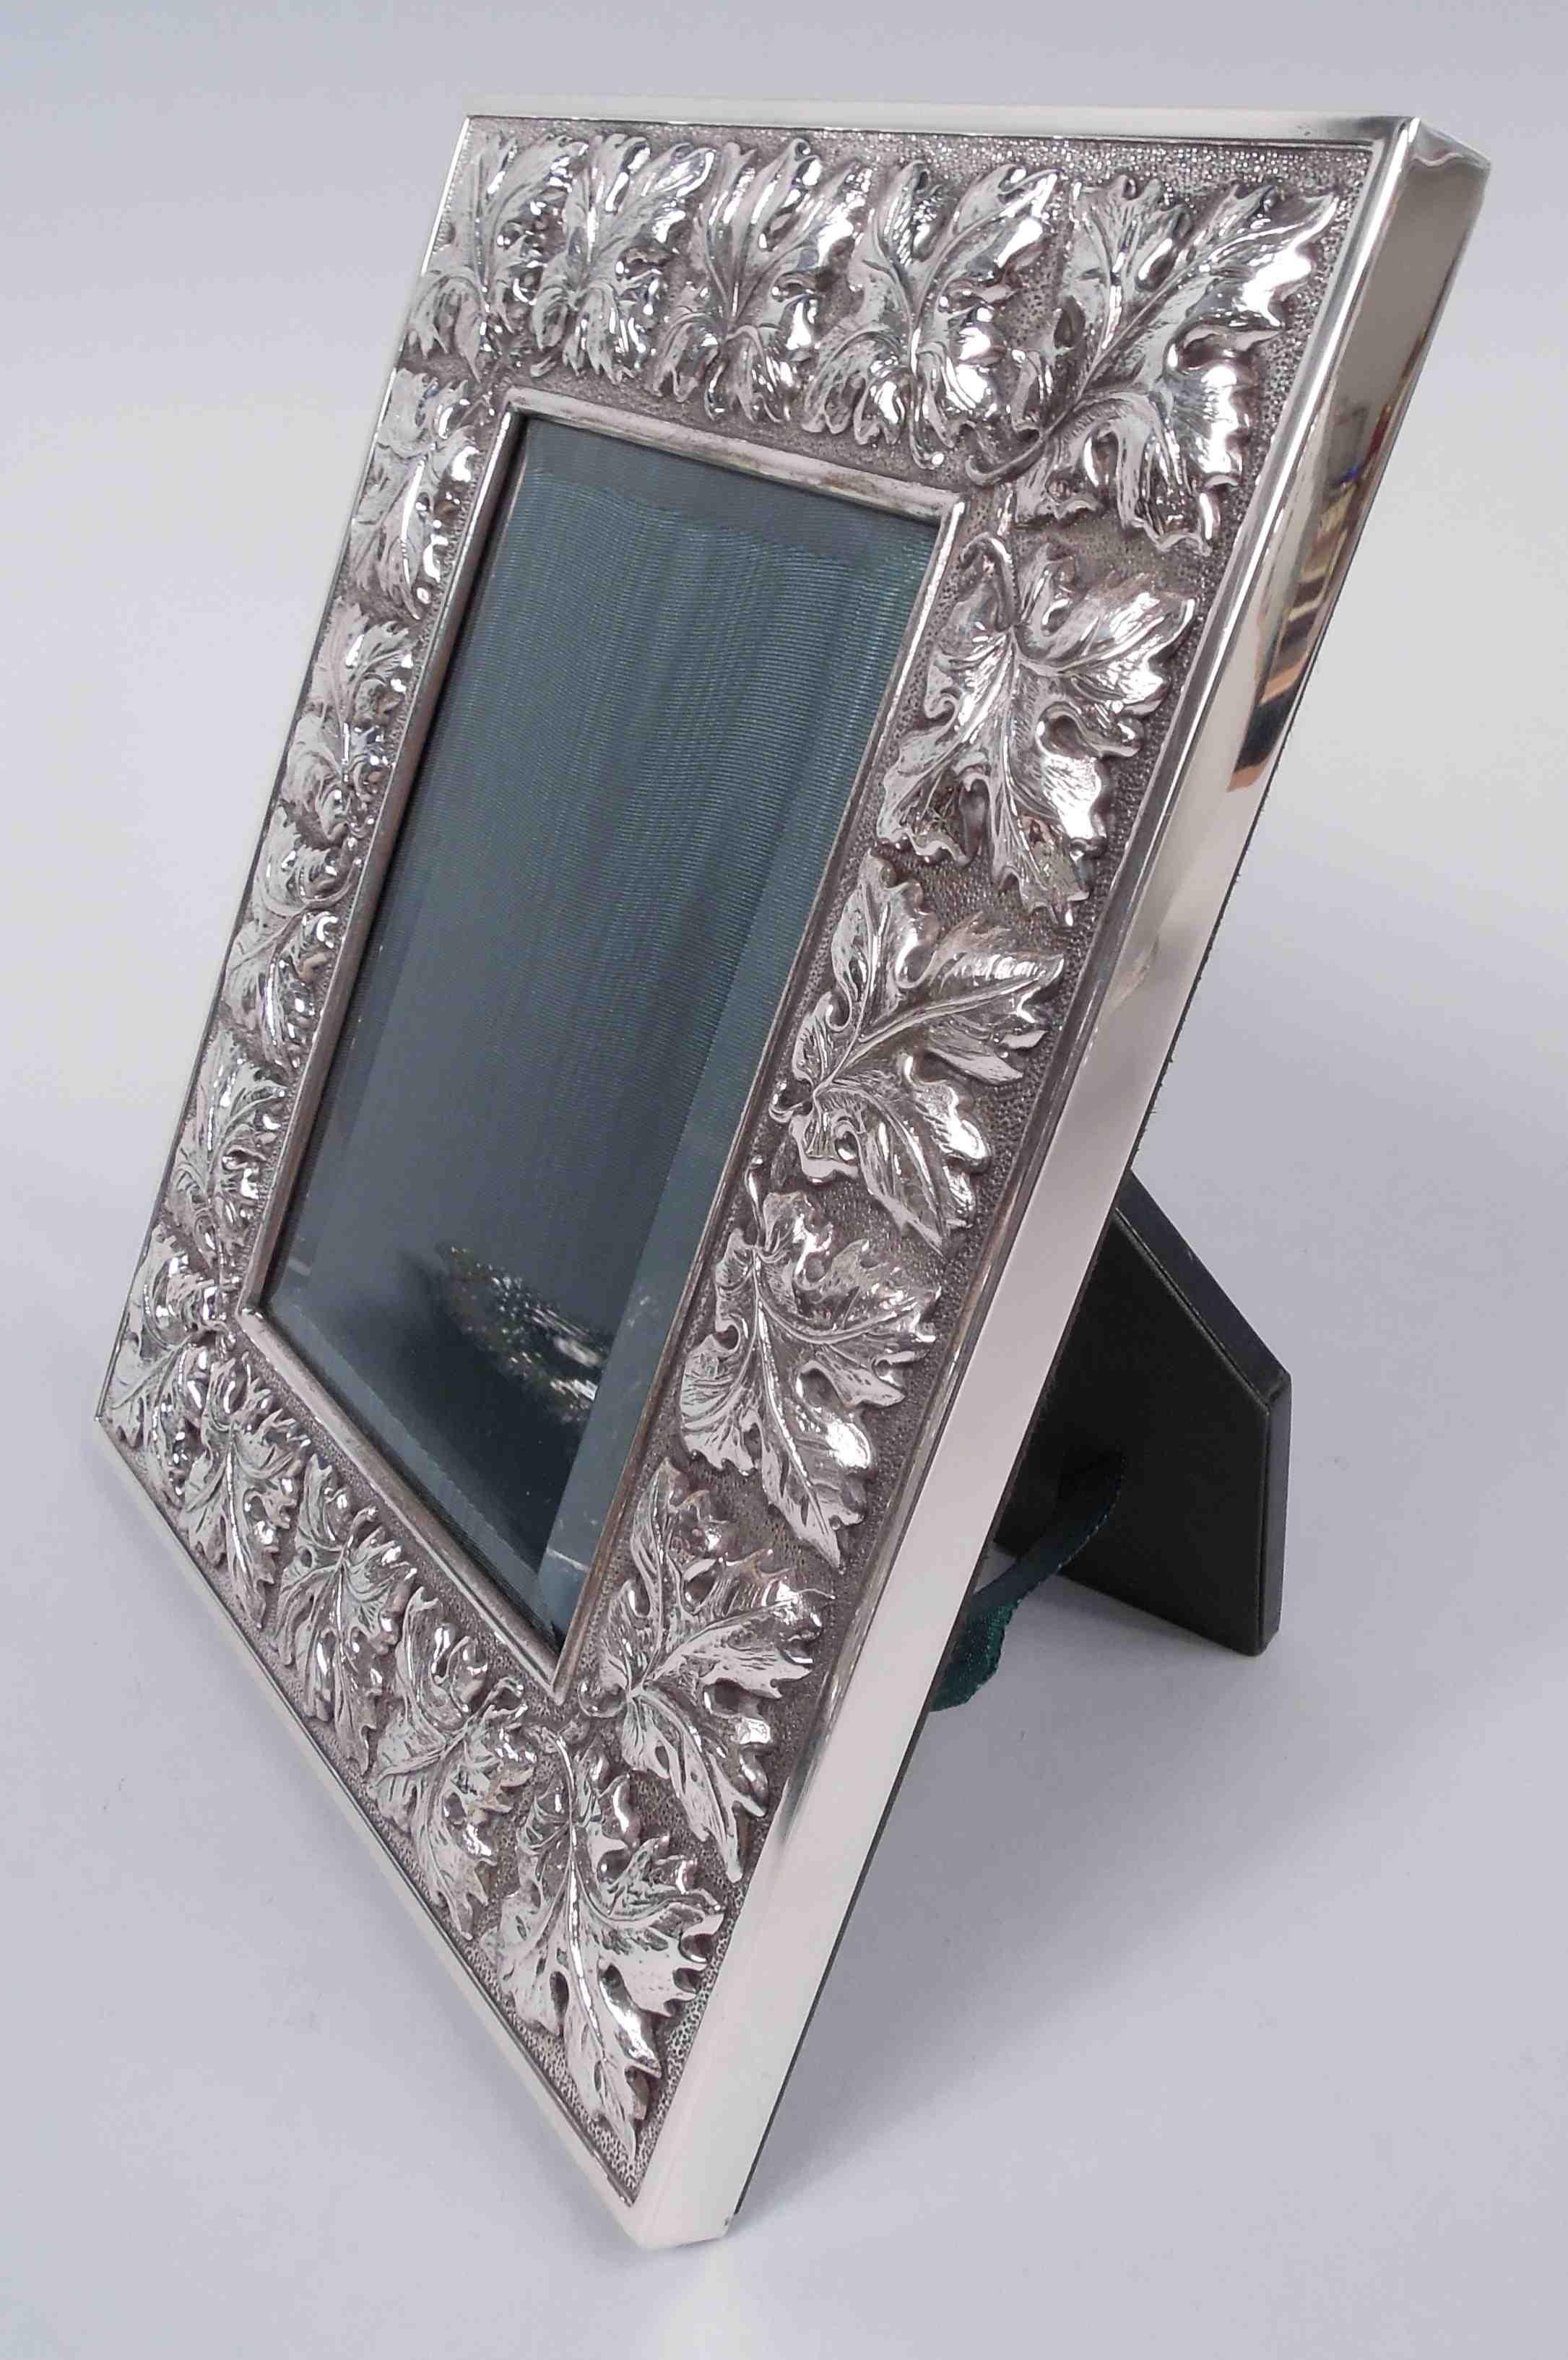 Neoclassical Revival Buccellati Modern Classical Sterling Silver Picture Frame